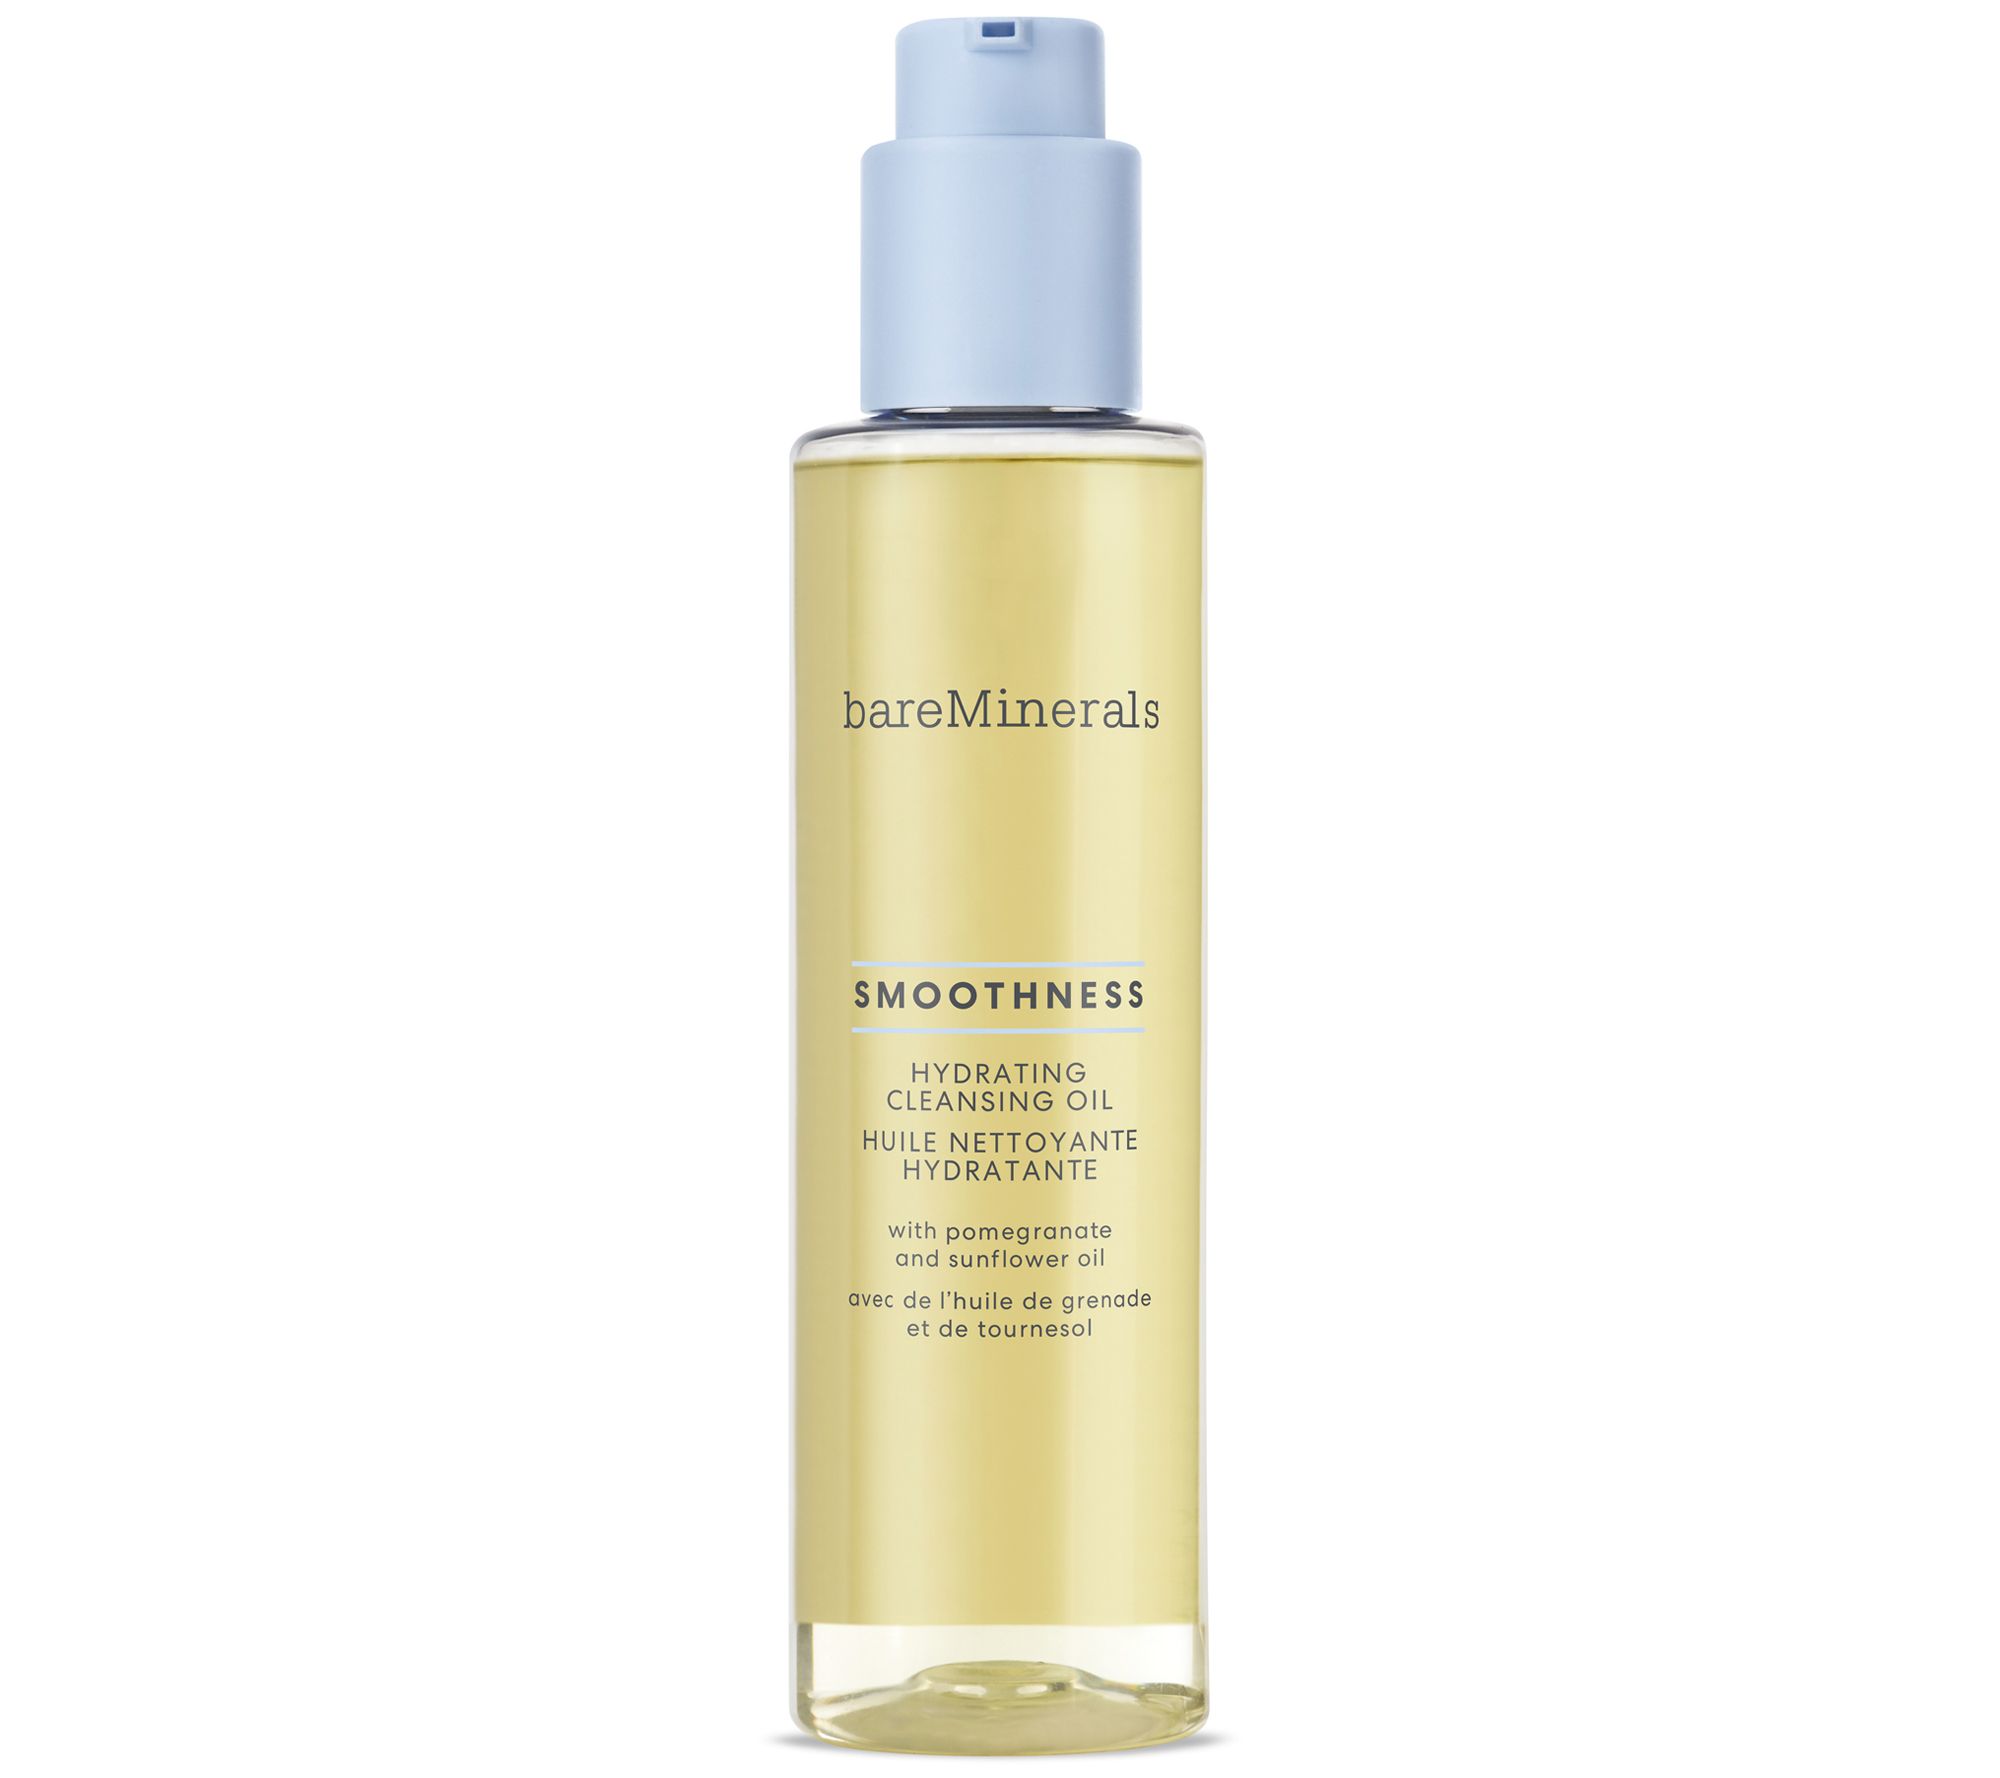 bareMinerals Smoothness Hydrating Cleansing Oil - QVC.com